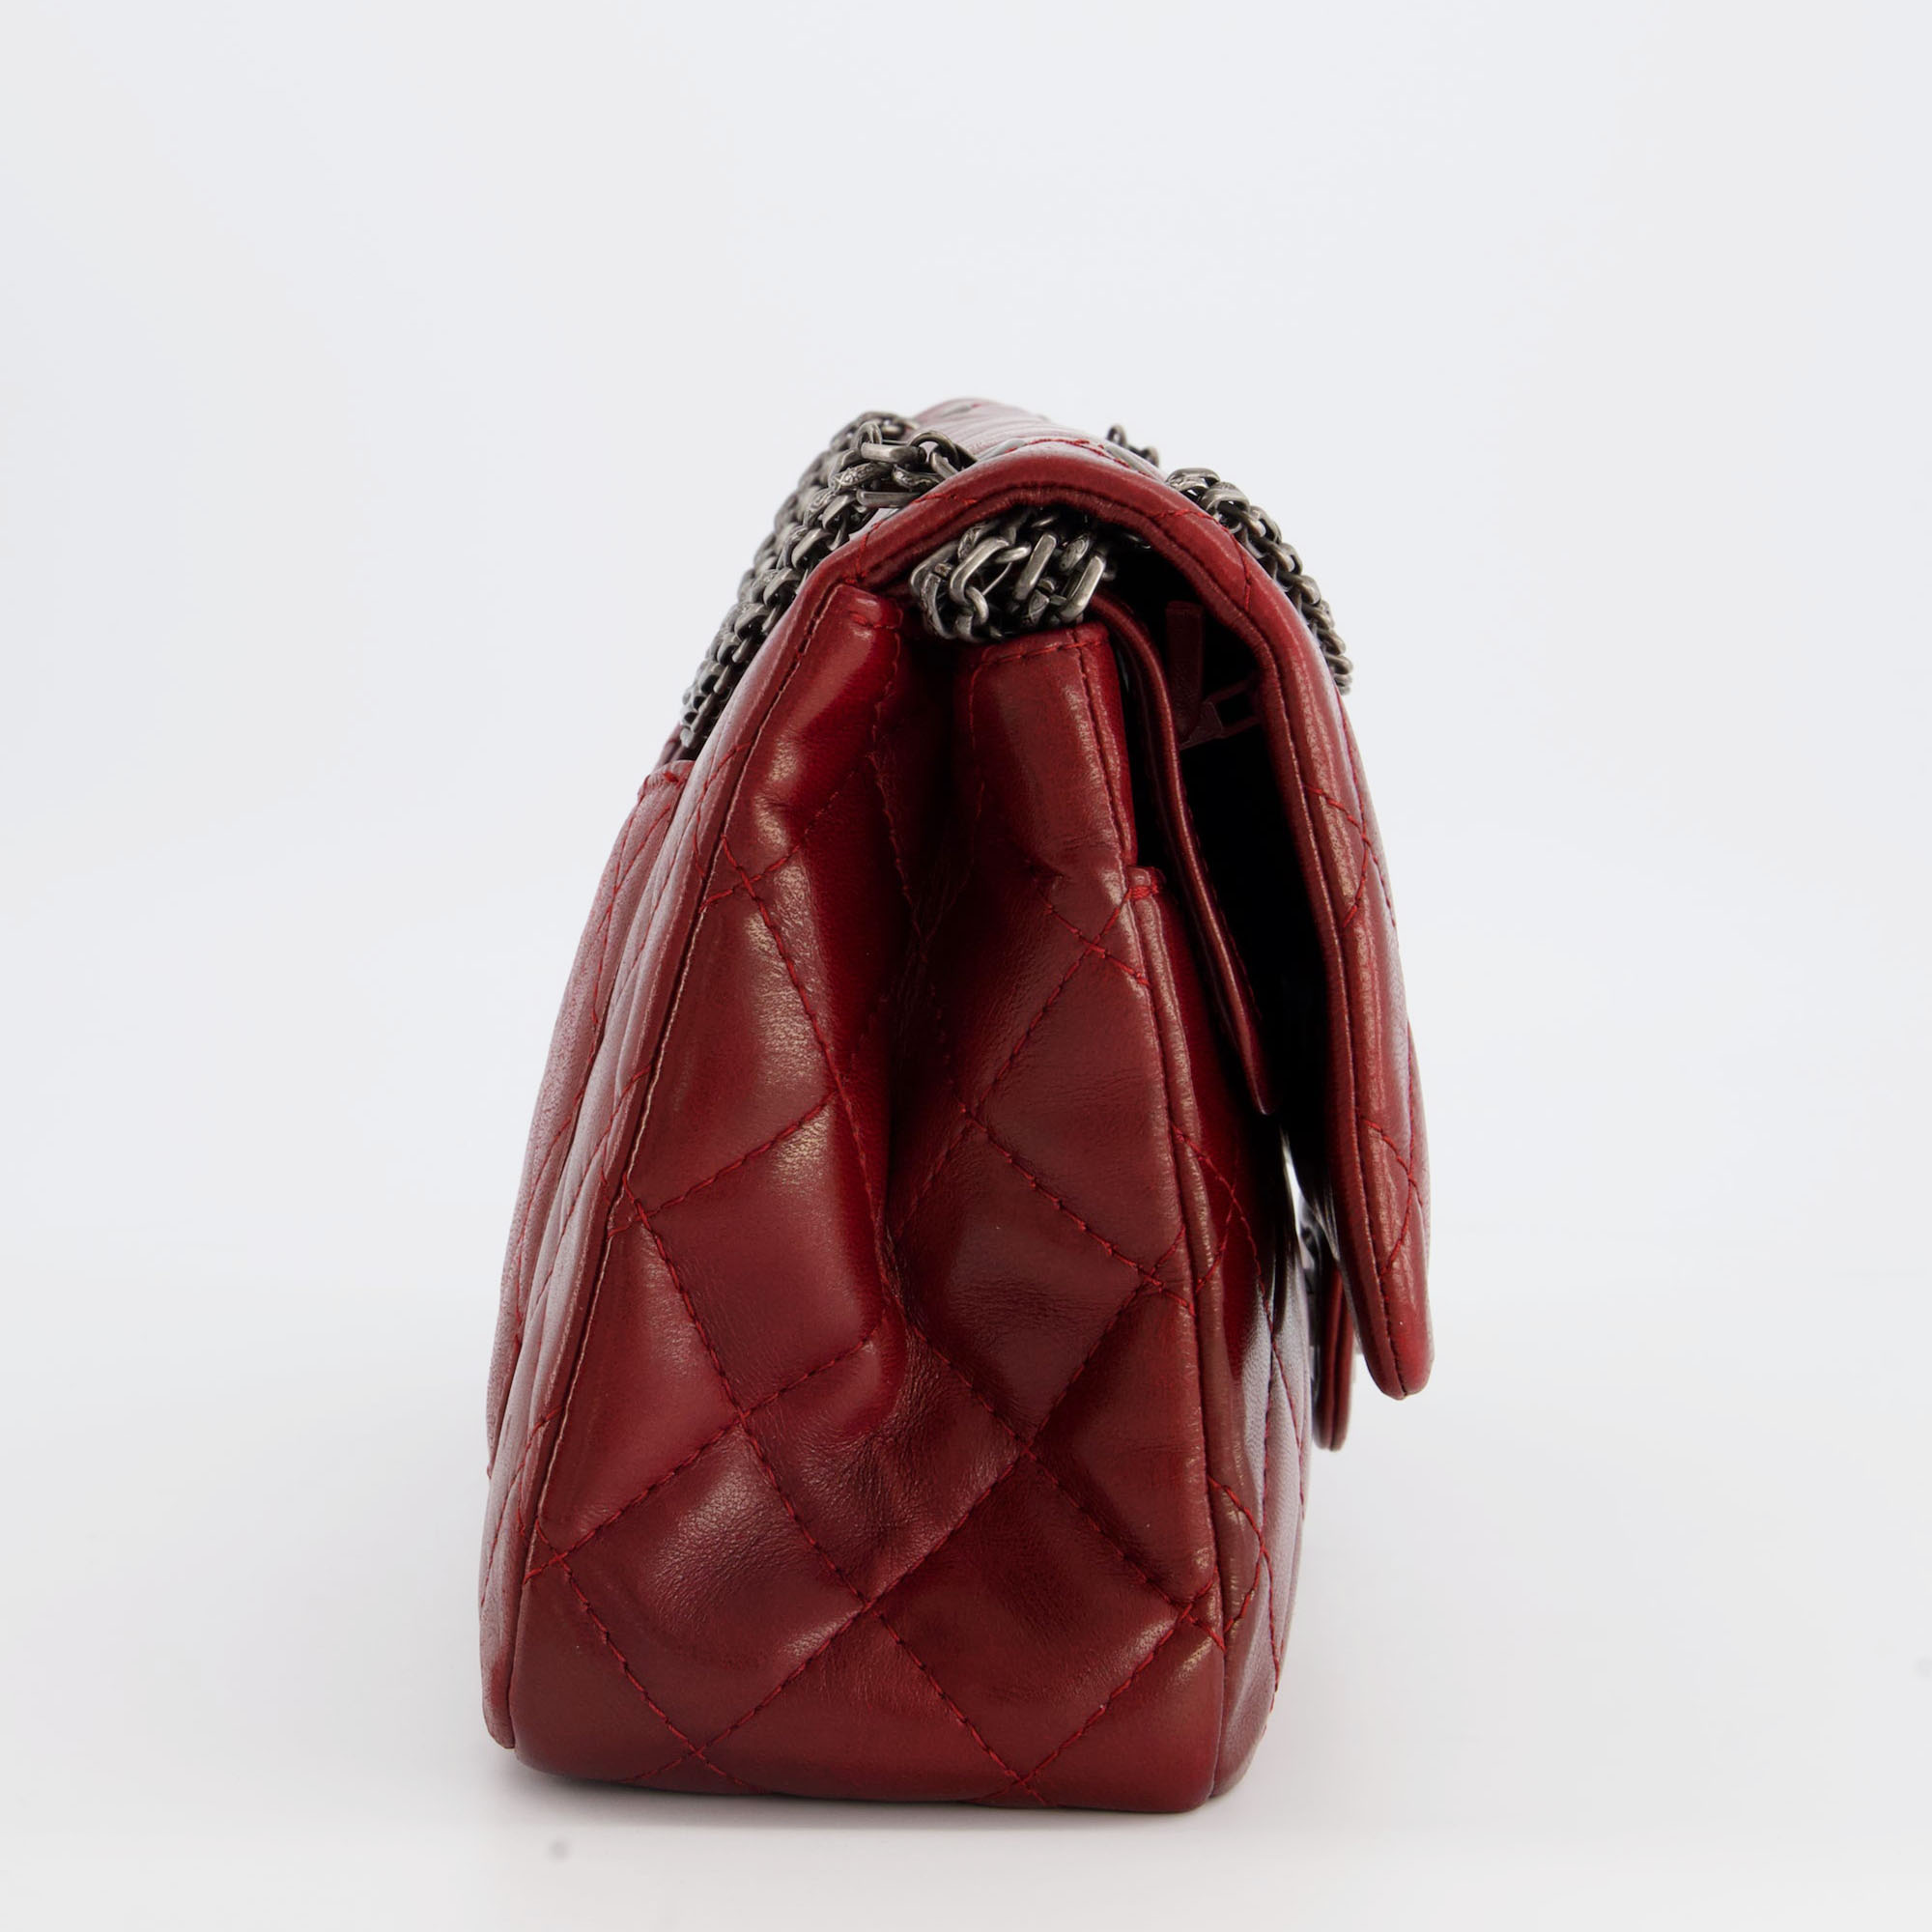 Chanel Deep Red Medium Reissue Bag In Lambskin Leather With Ruthenium Hardware